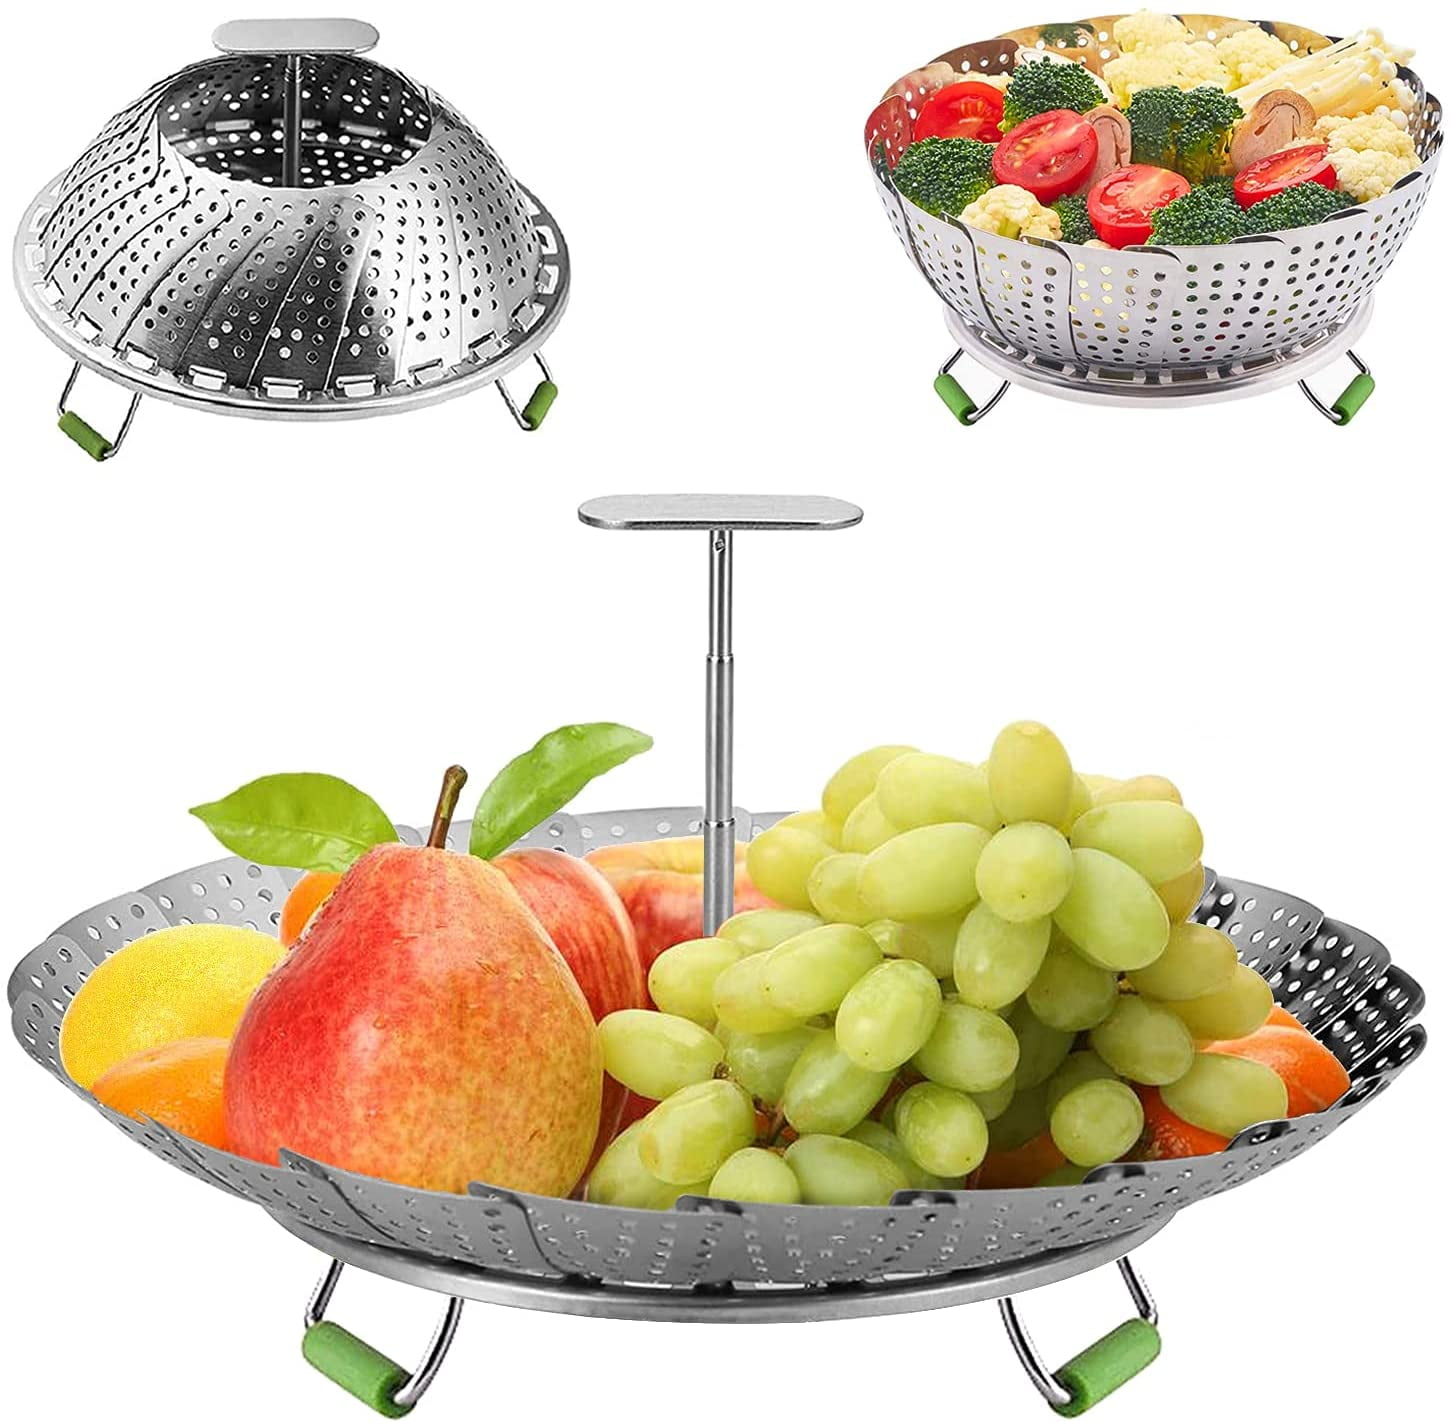 Collapsible Steamer Basket, Stainless Steel Foldable Steaming Rack, Vegetable  Steamer Basket, Stainless Steel Folding Steamer with Extending Removable  Center Handle Insert for Veggie Seafood Cooking to Fit Various Size Pot,  Expandable Filter